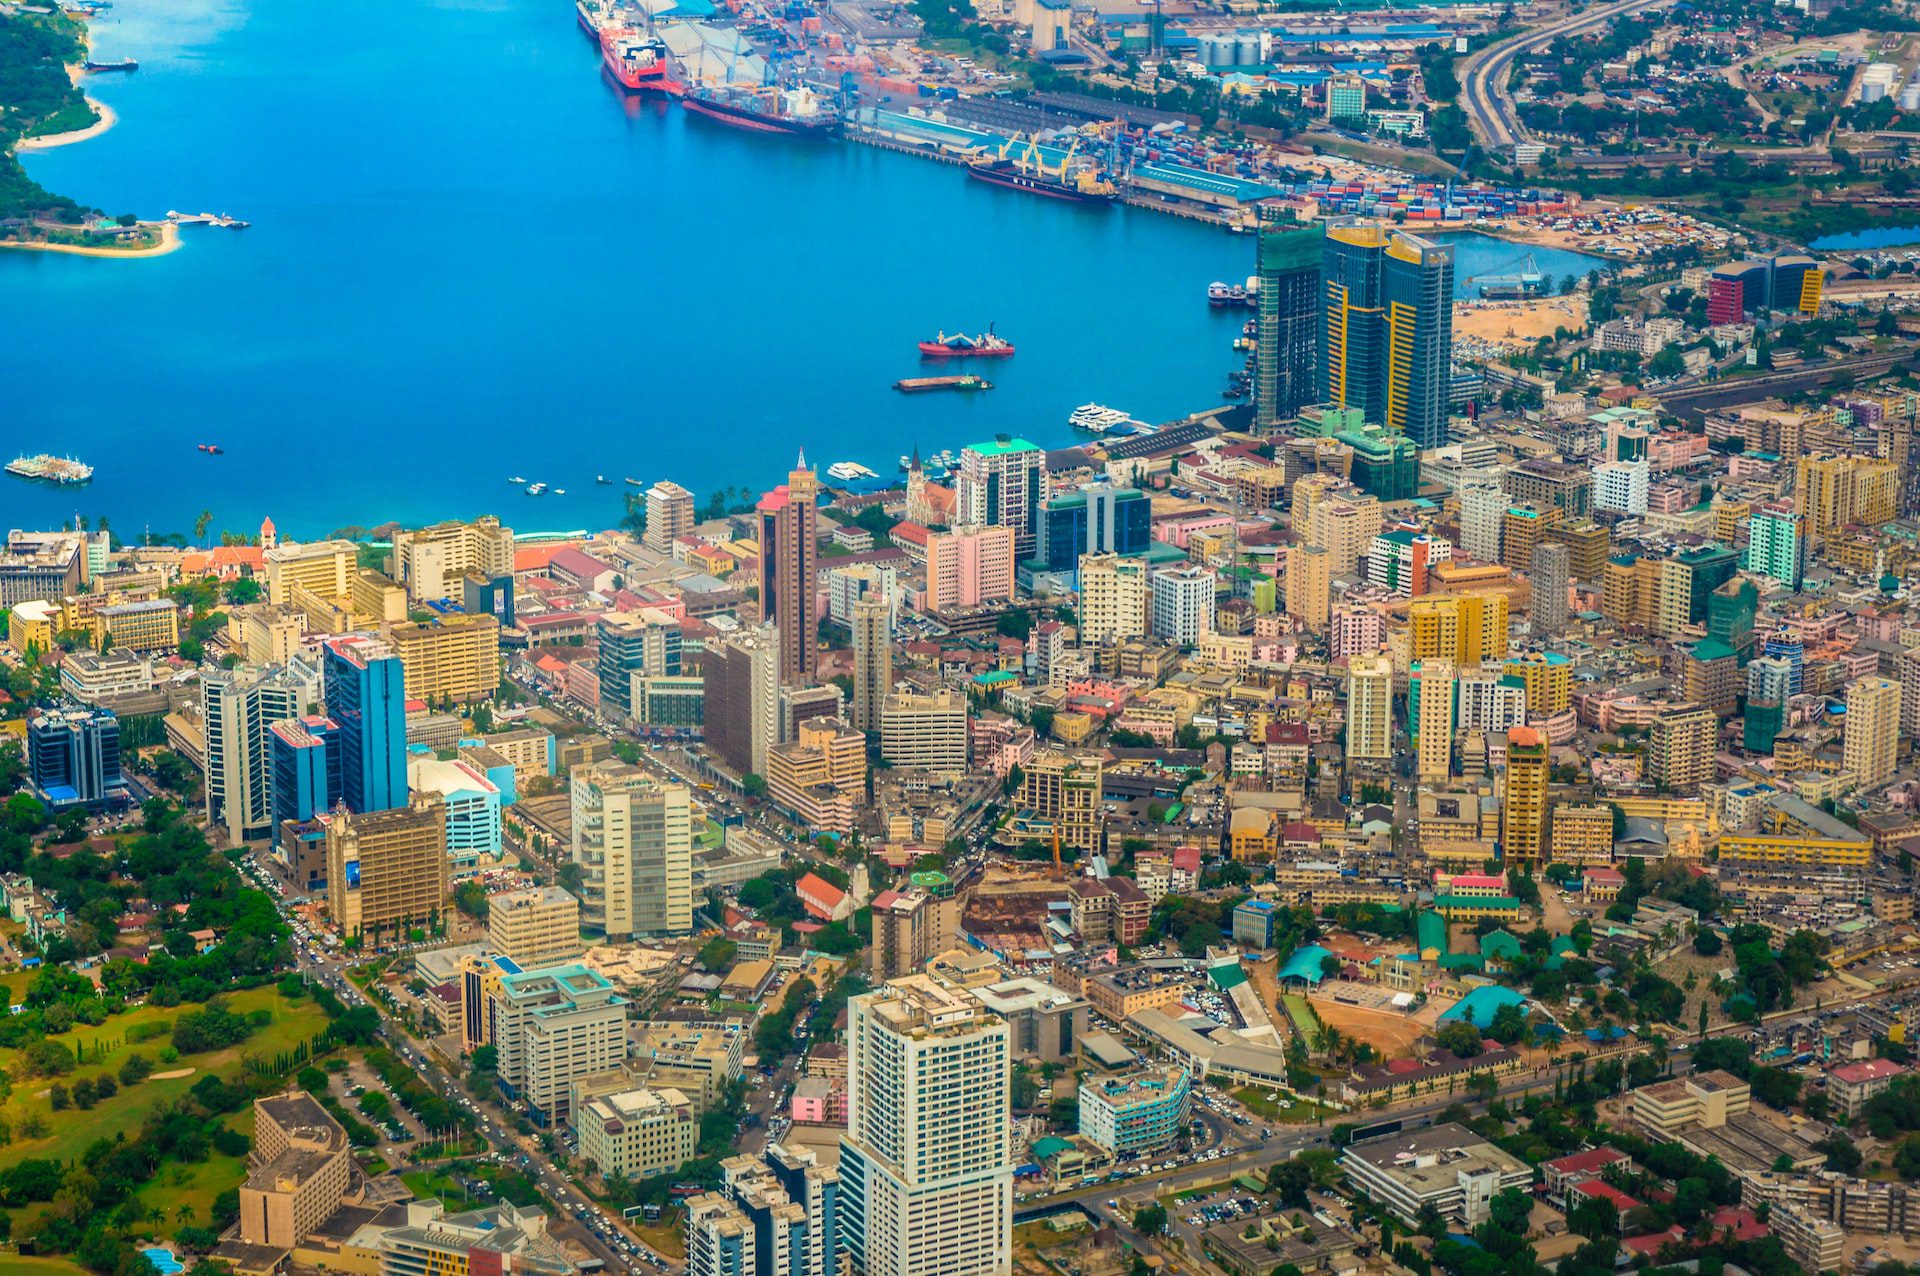 Aerial view of Dar es Salaam city and the port.